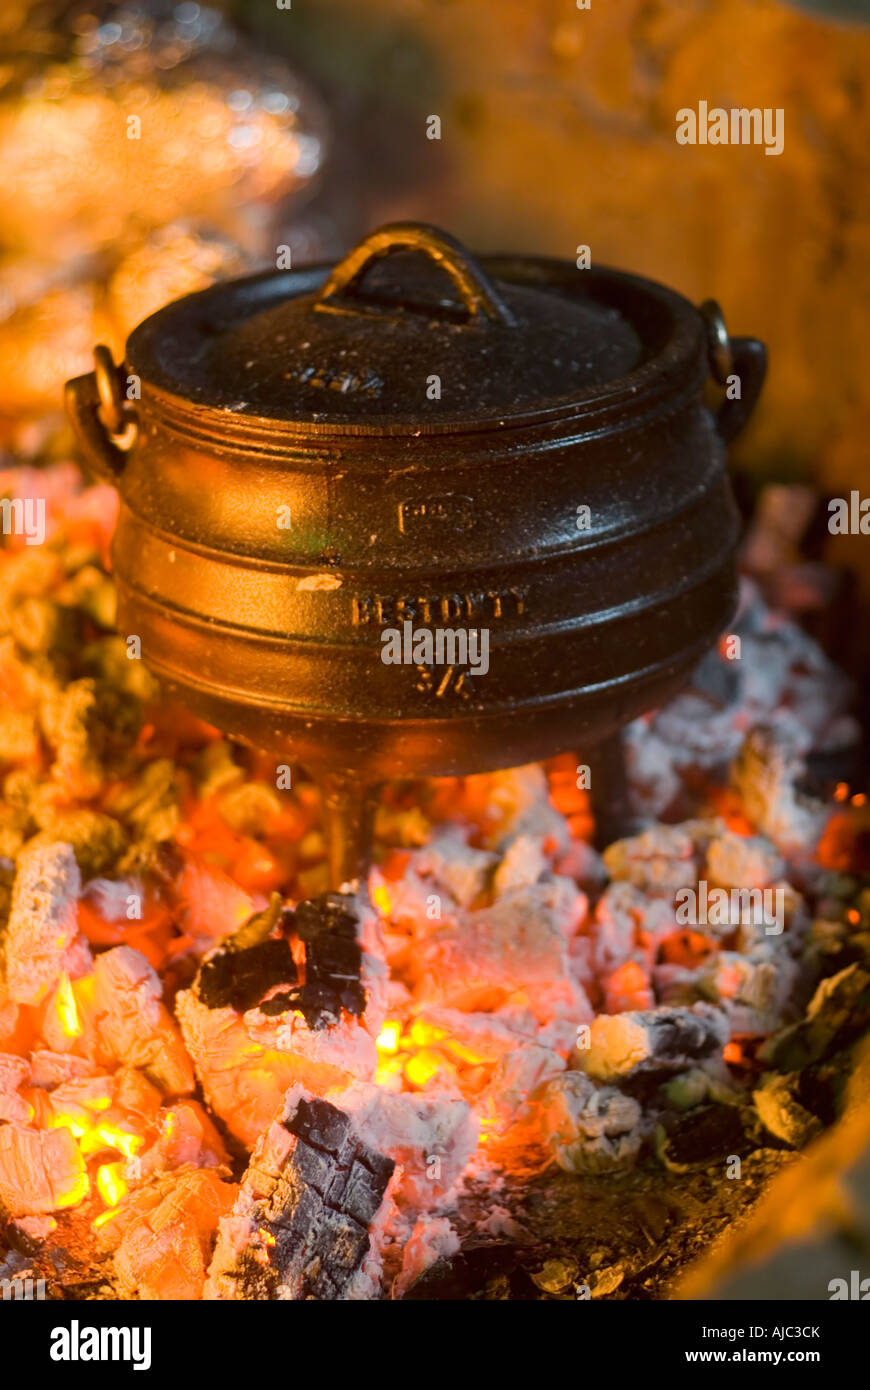 https://c8.alamy.com/comp/AJC3CK/south-african-traditional-cooking-pot-potjie-pot-standing-in-the-embers-AJC3CK.jpg